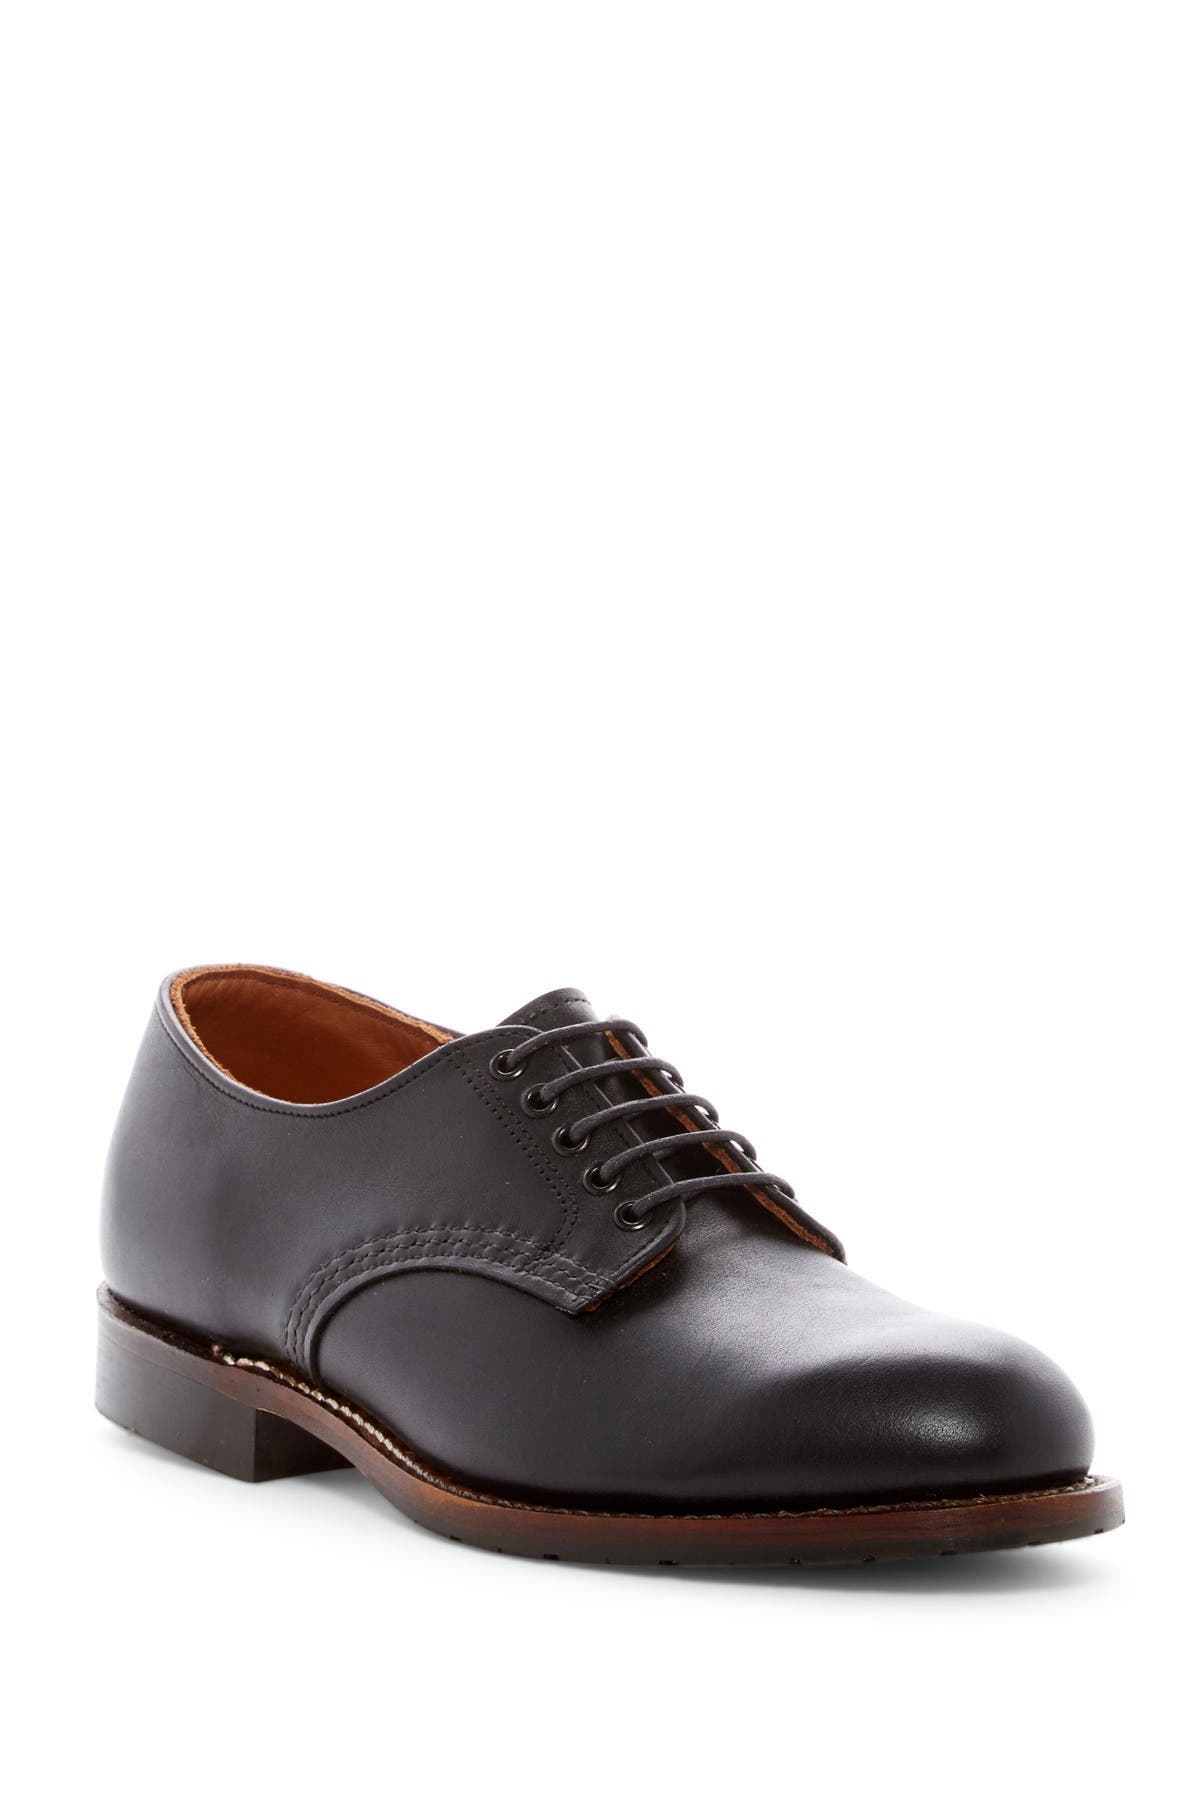 red wing derby shoes